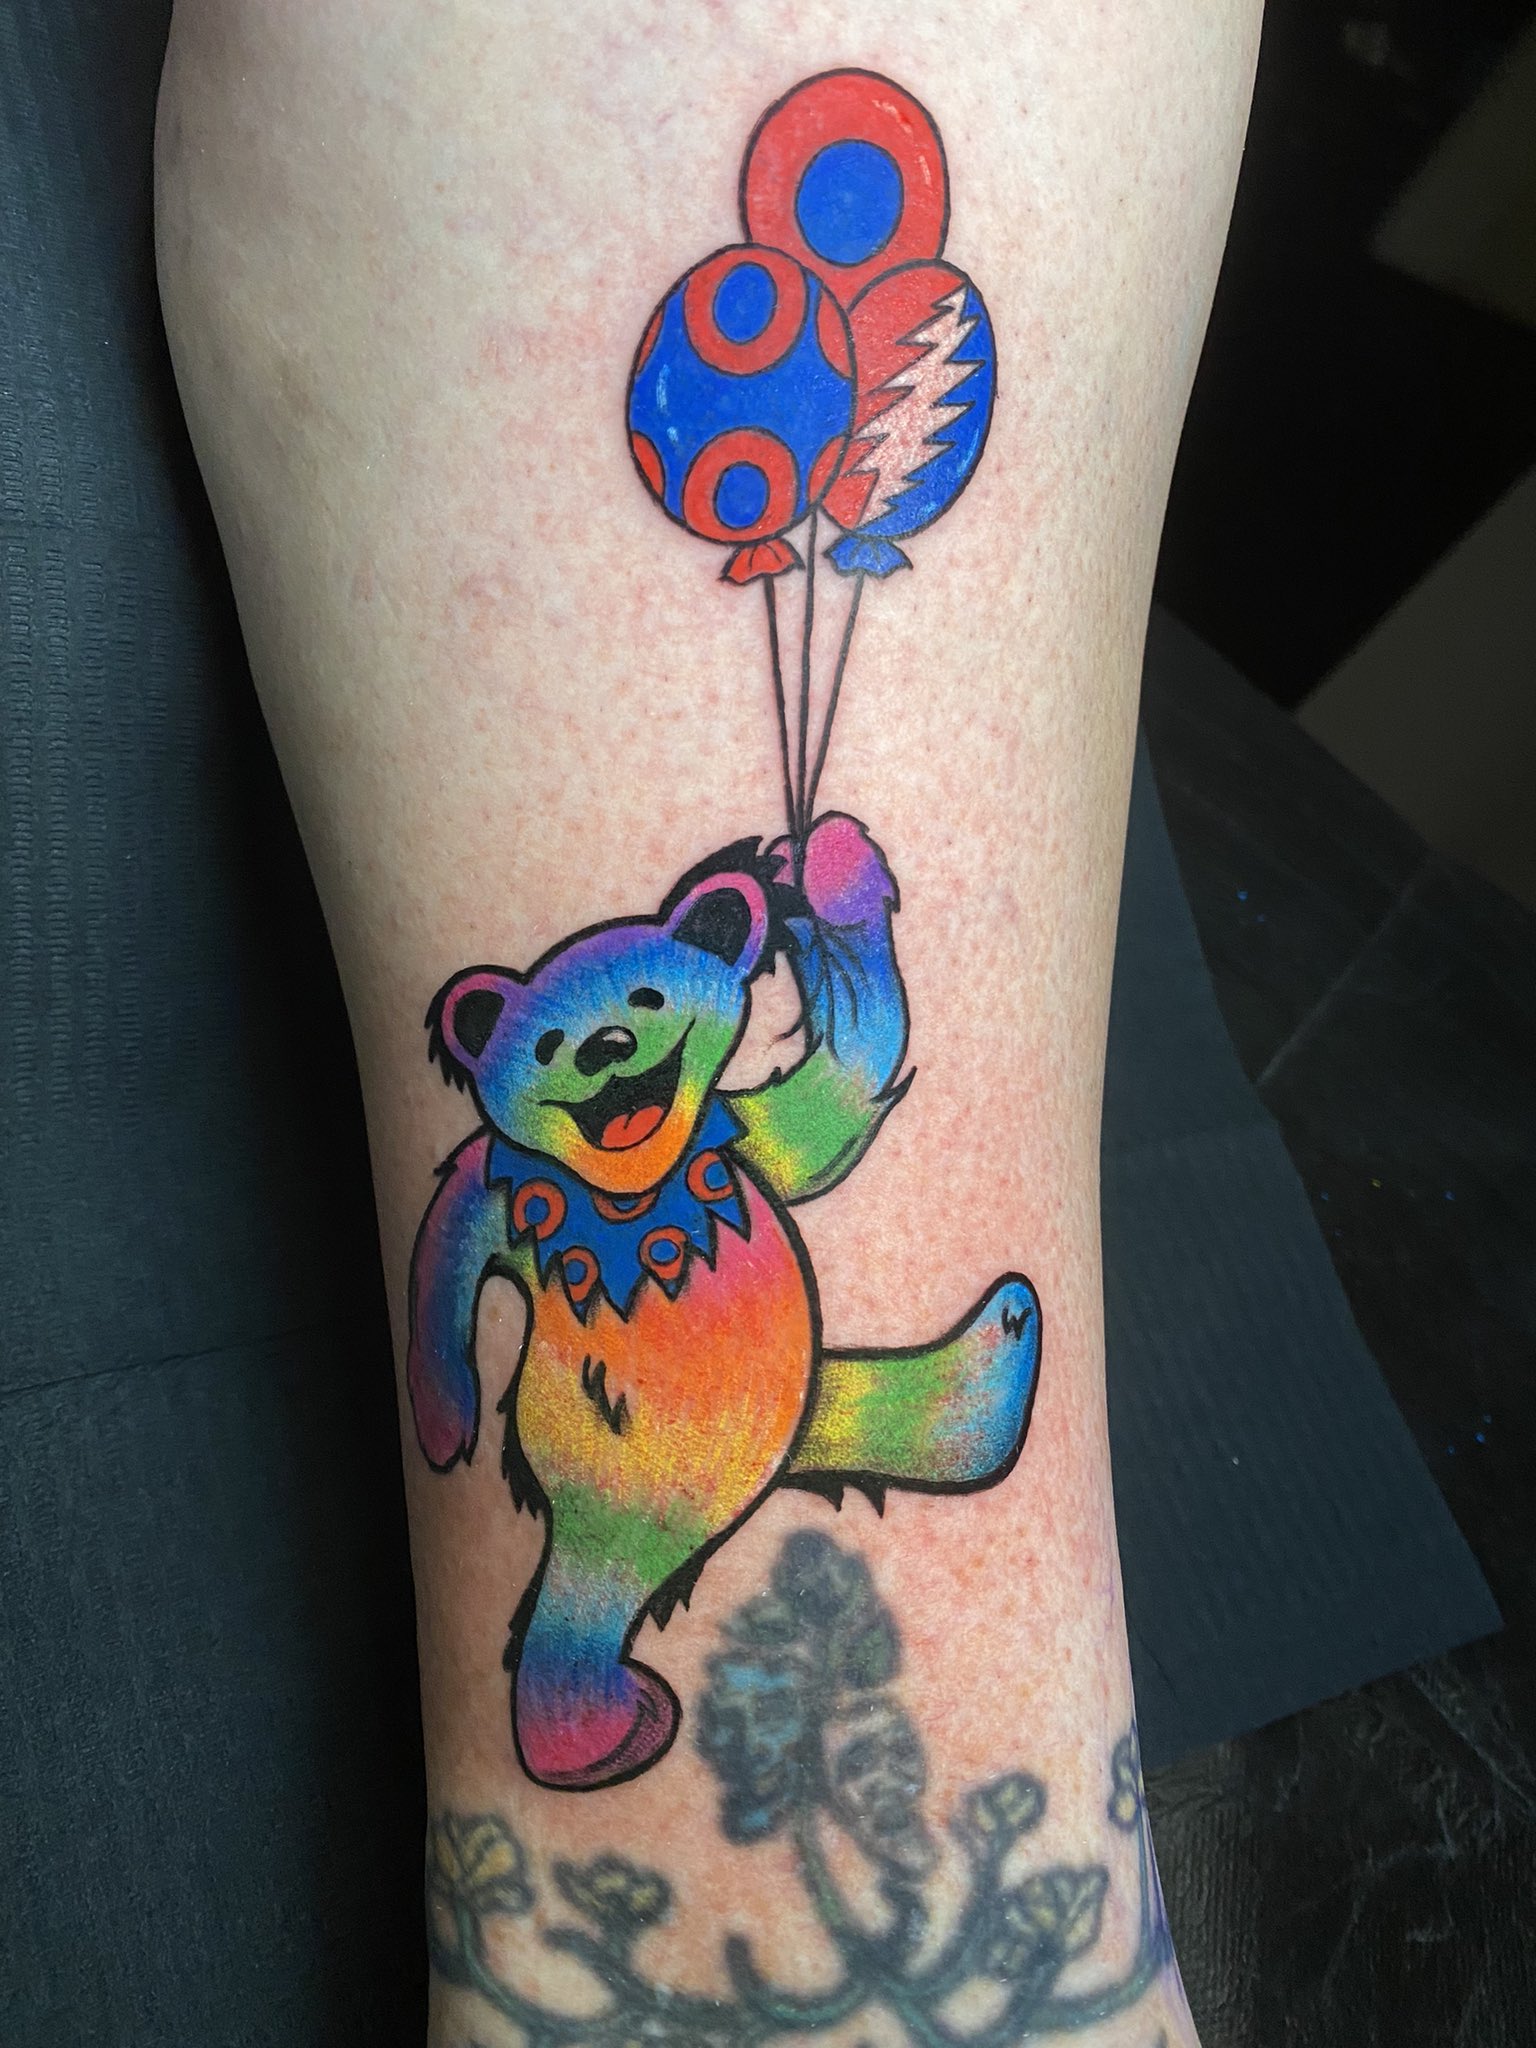 Tattoo uploaded by Brittany Robertson  Grateful Dead tattoo Grateful Dead  bear  Tattoodo